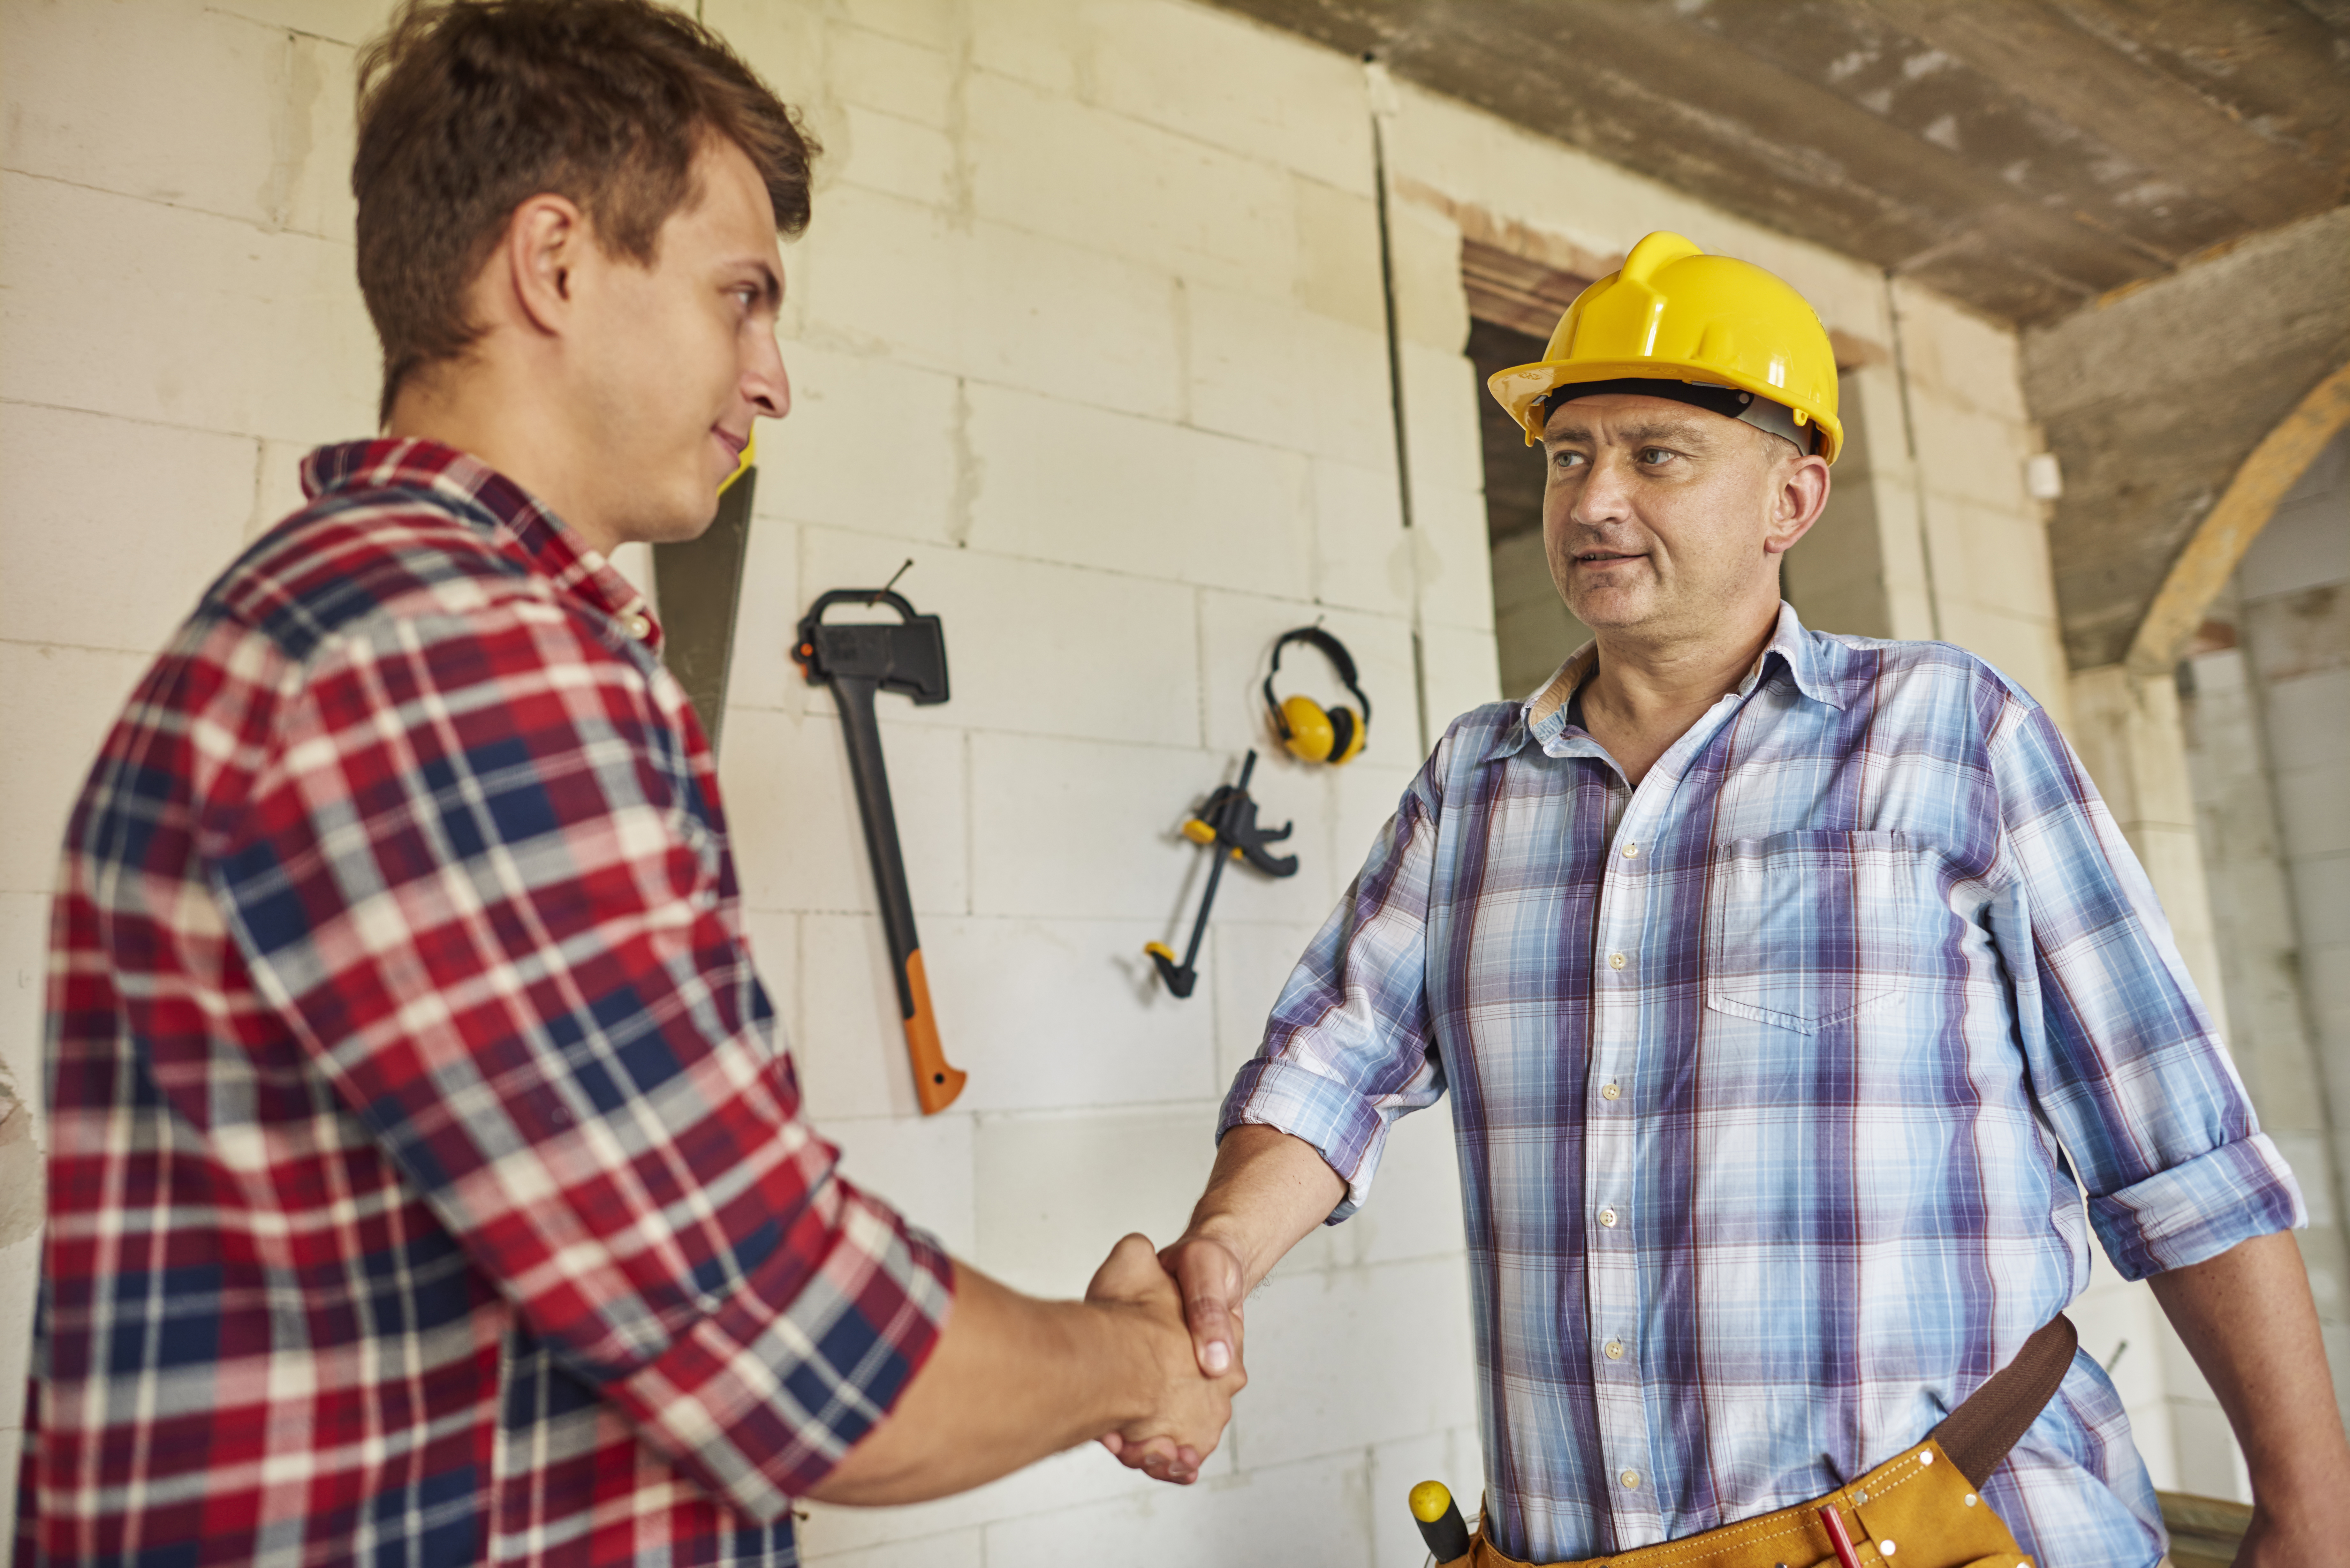 One of the Best Construction Contractors in Ottawa, wearing a tool belt, plaid shirt and yellow hardhat confidently shakes the hand of his male client, who is also wearing a plaid shirt.  Both are standing in an unfinished concrete block walled room.